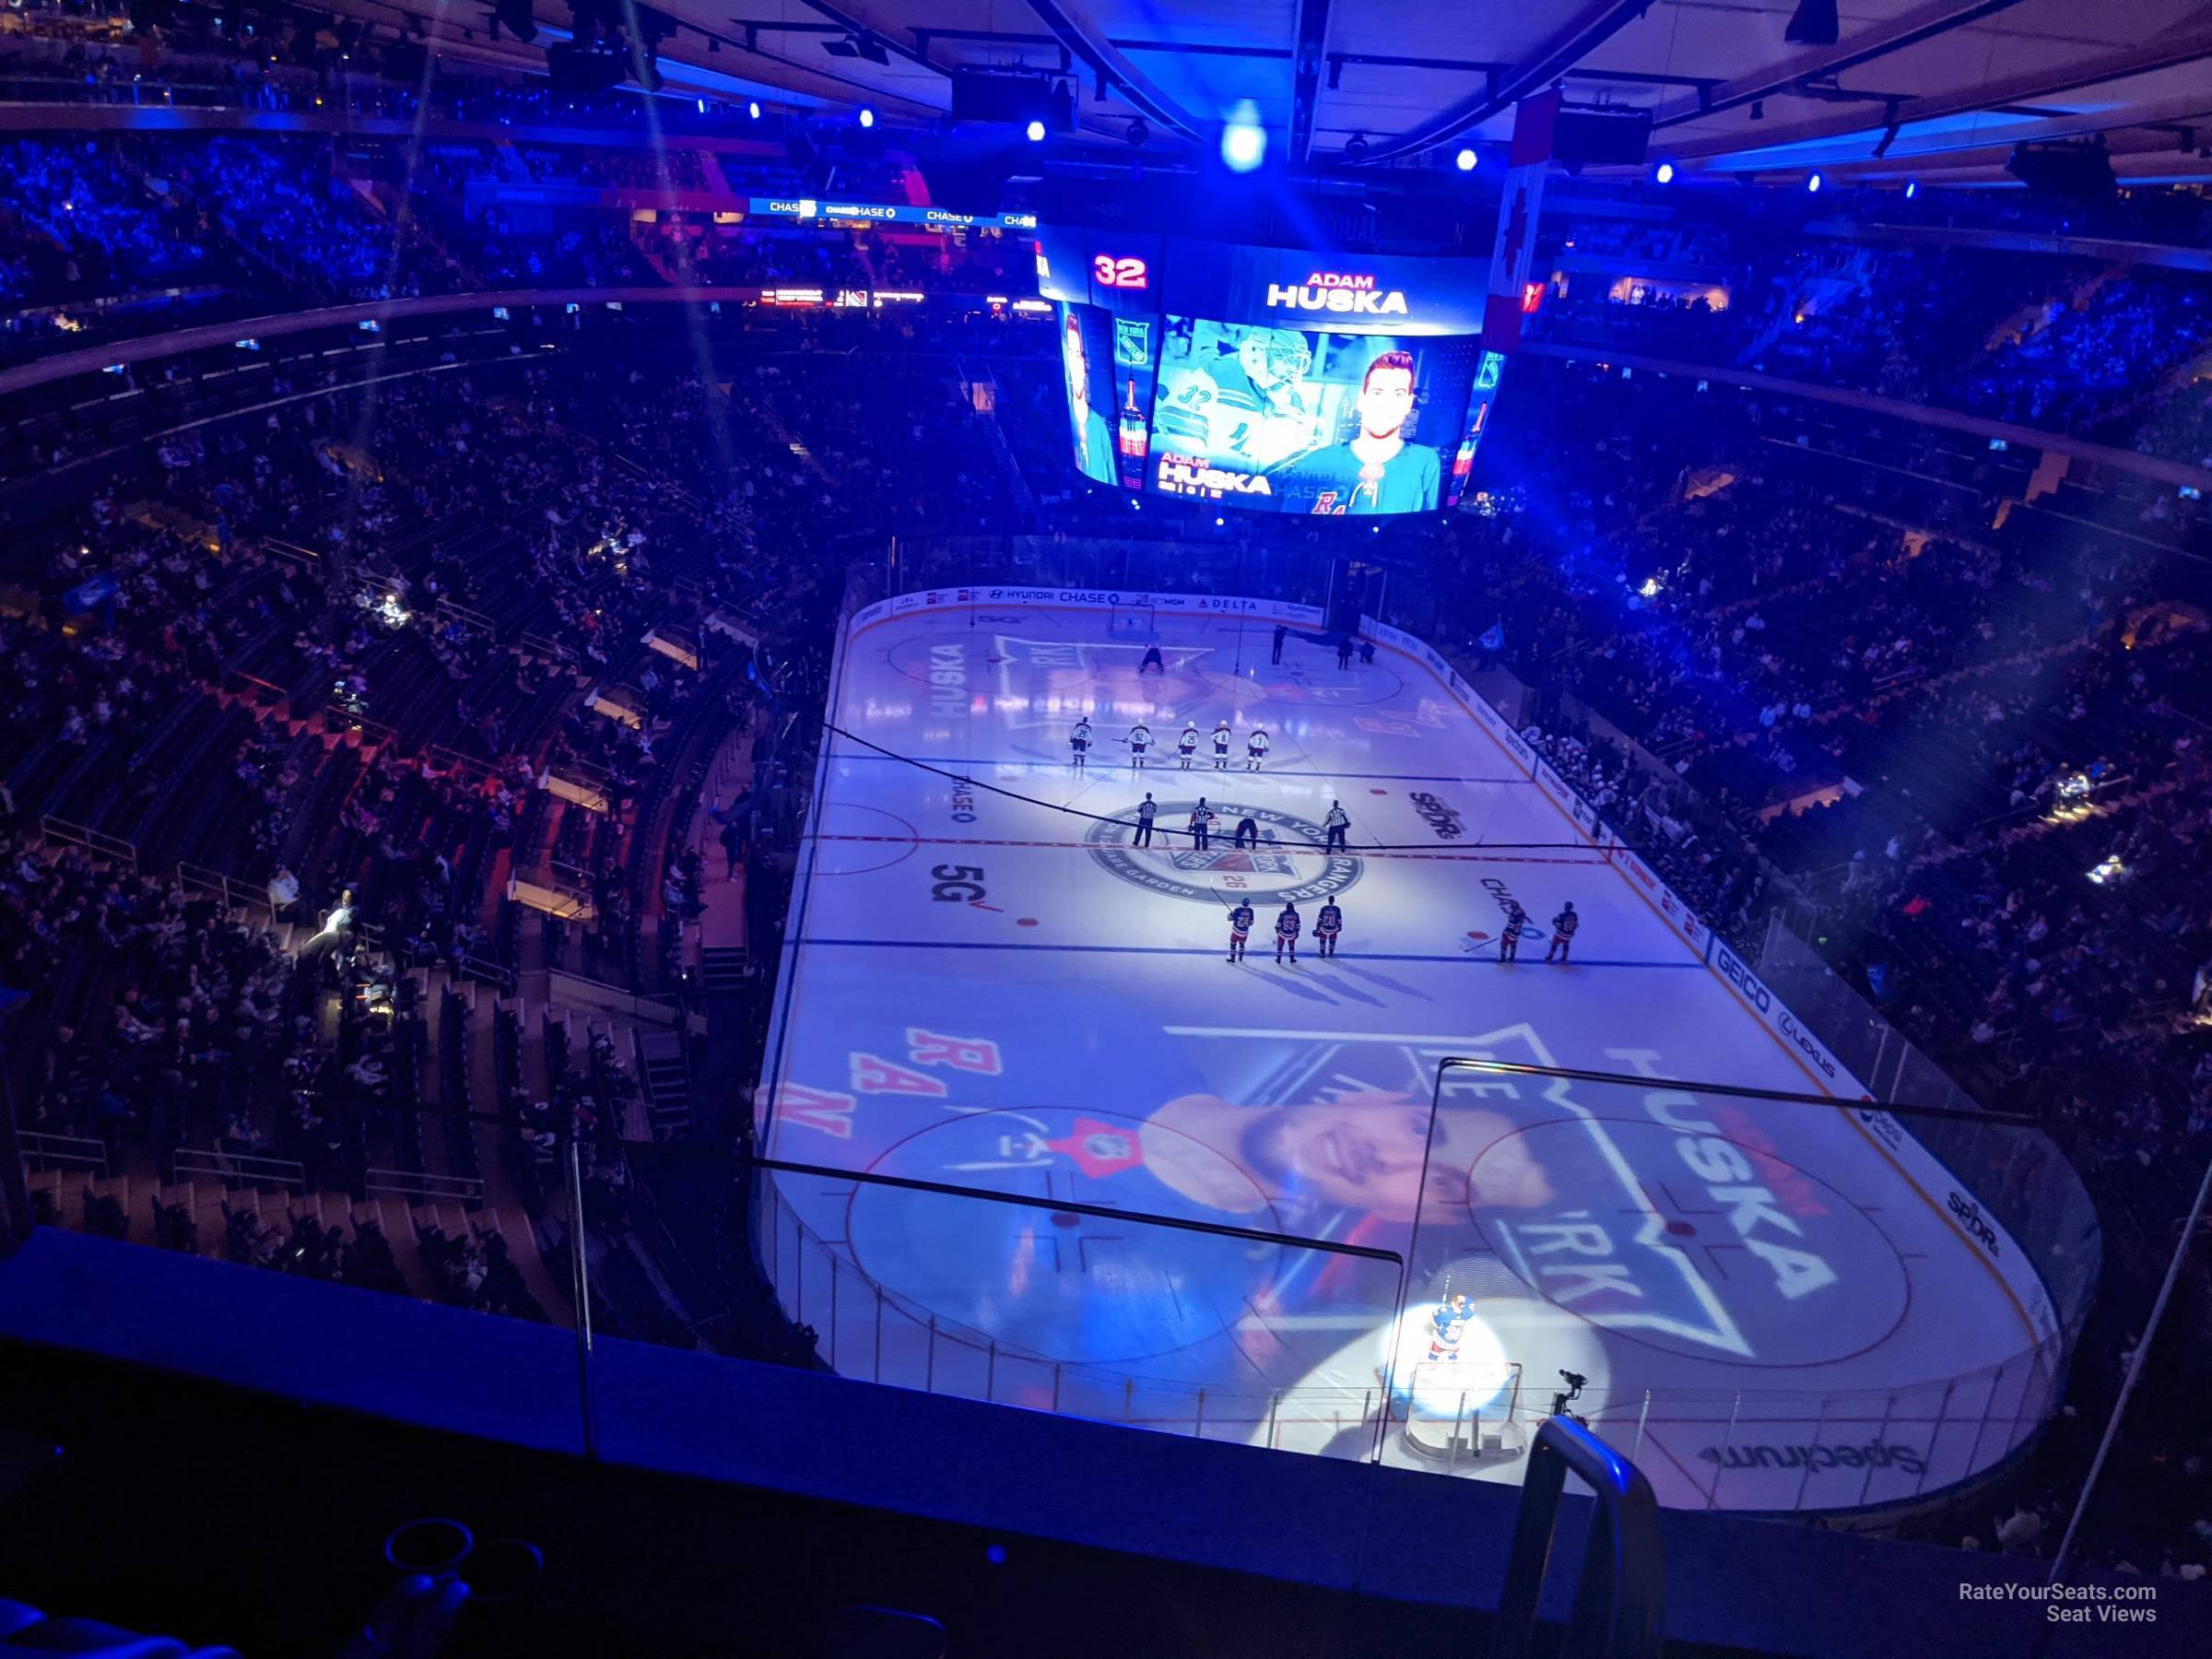 section 302, row 2 seat view  for hockey - madison square garden